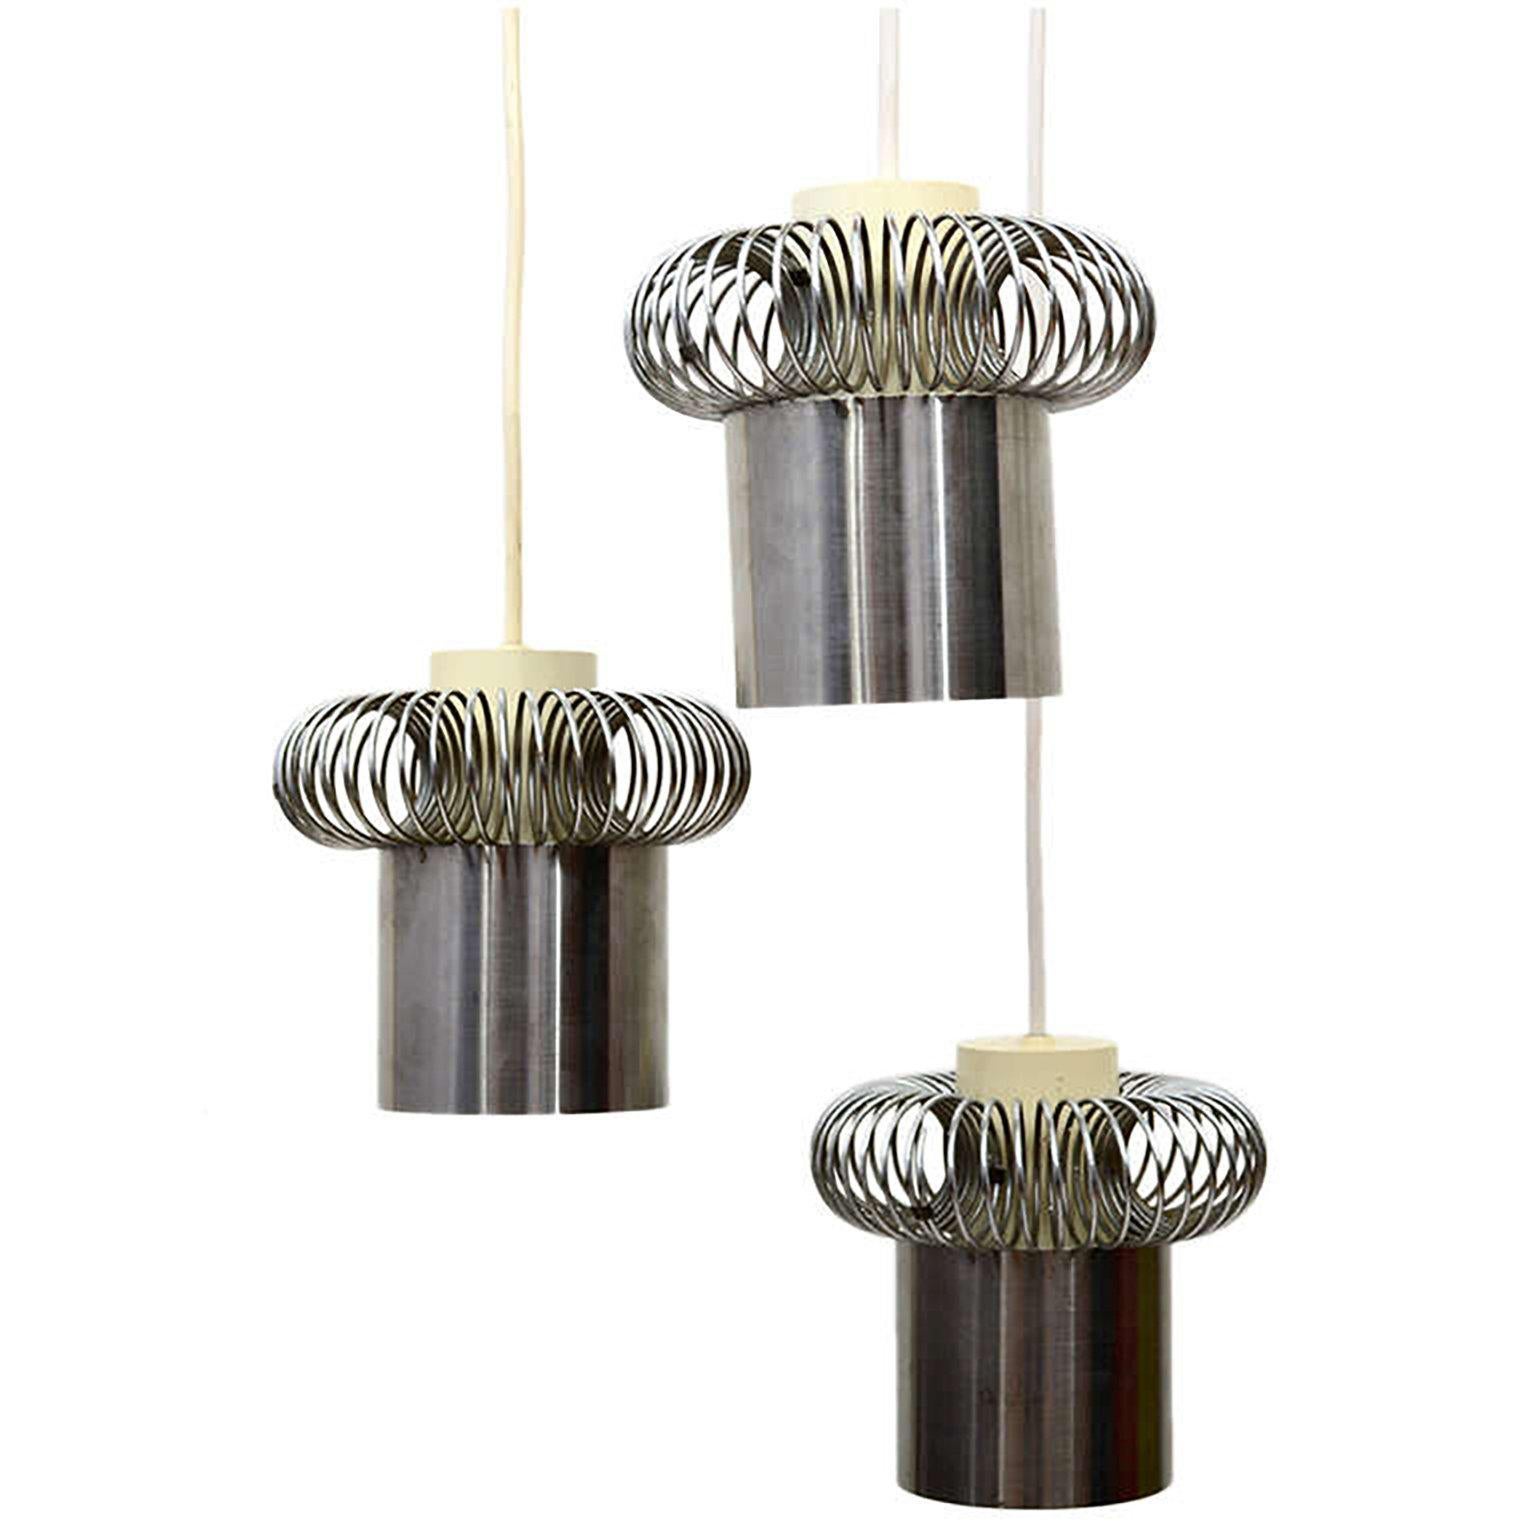 European chandelier constructed with three hanging shades.
Based in the construction, it appears to be a late 1960s or 1970s production. 
The shade has a plastic cover where the spring circular coil fits in. The bottom section appears to be a